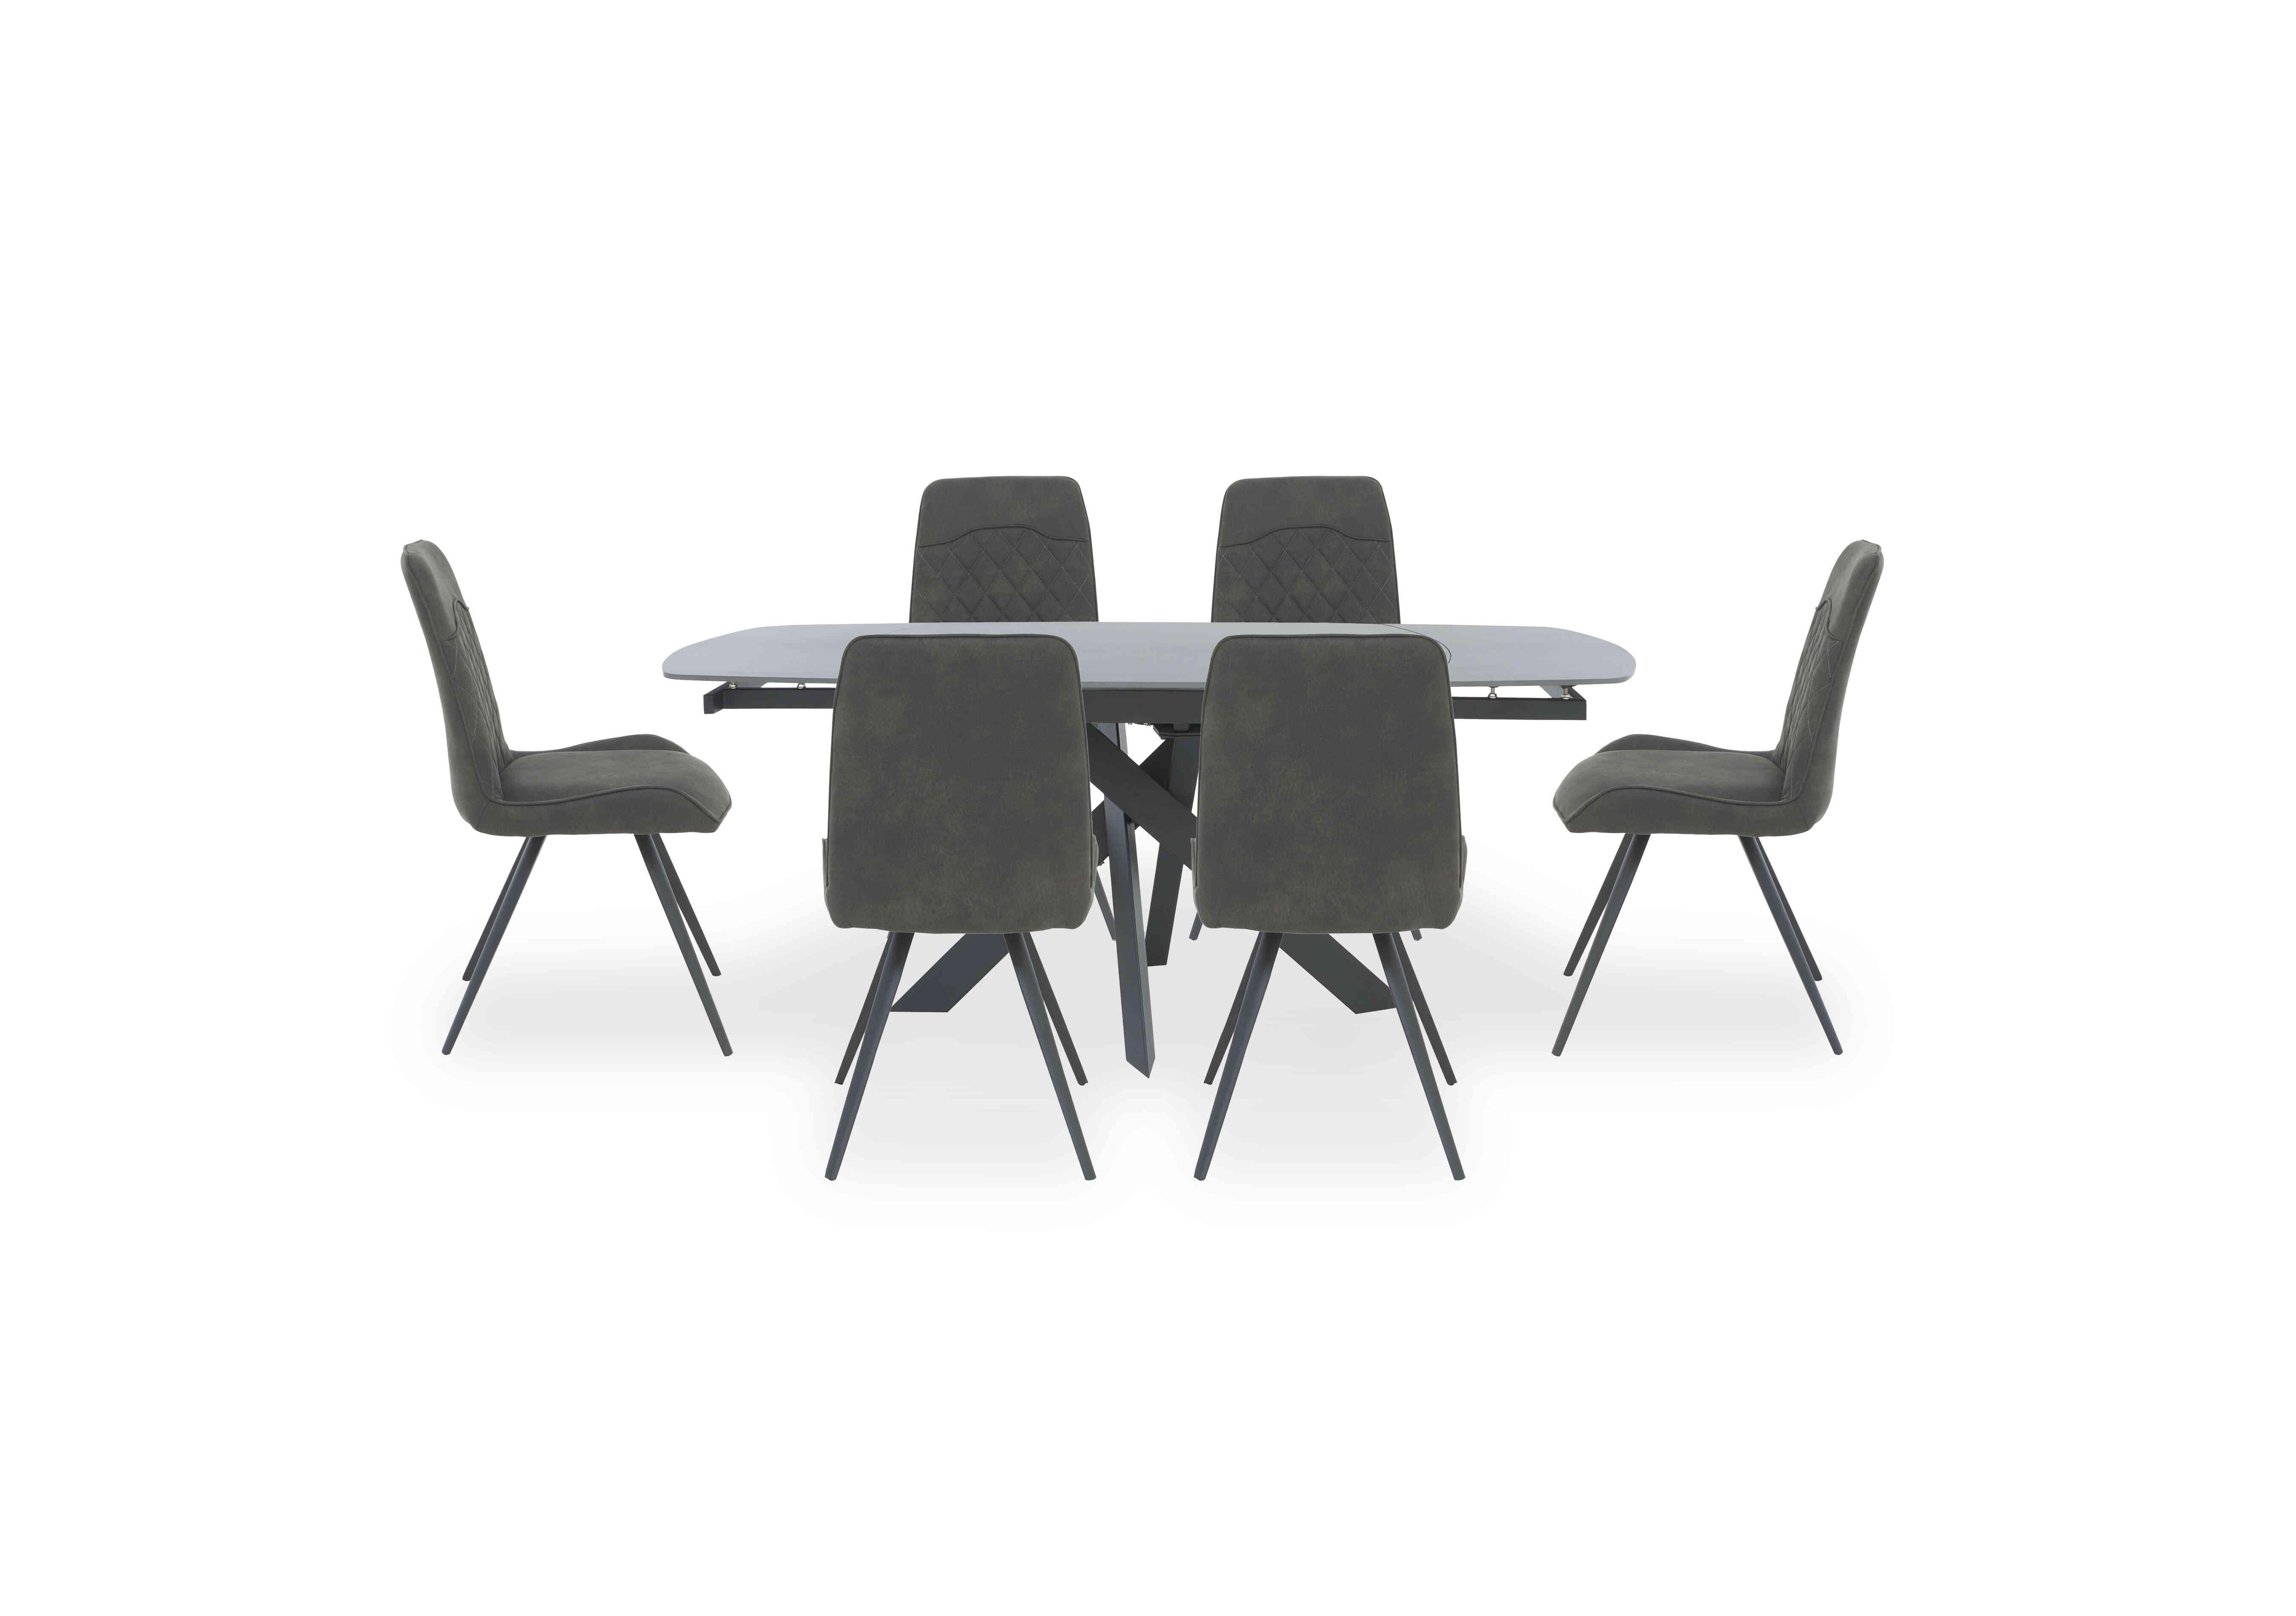 Warrior Grey Swivel Extending Dining Table with 6 Standard Dining Chairs in Grey/Grey on Furniture Village